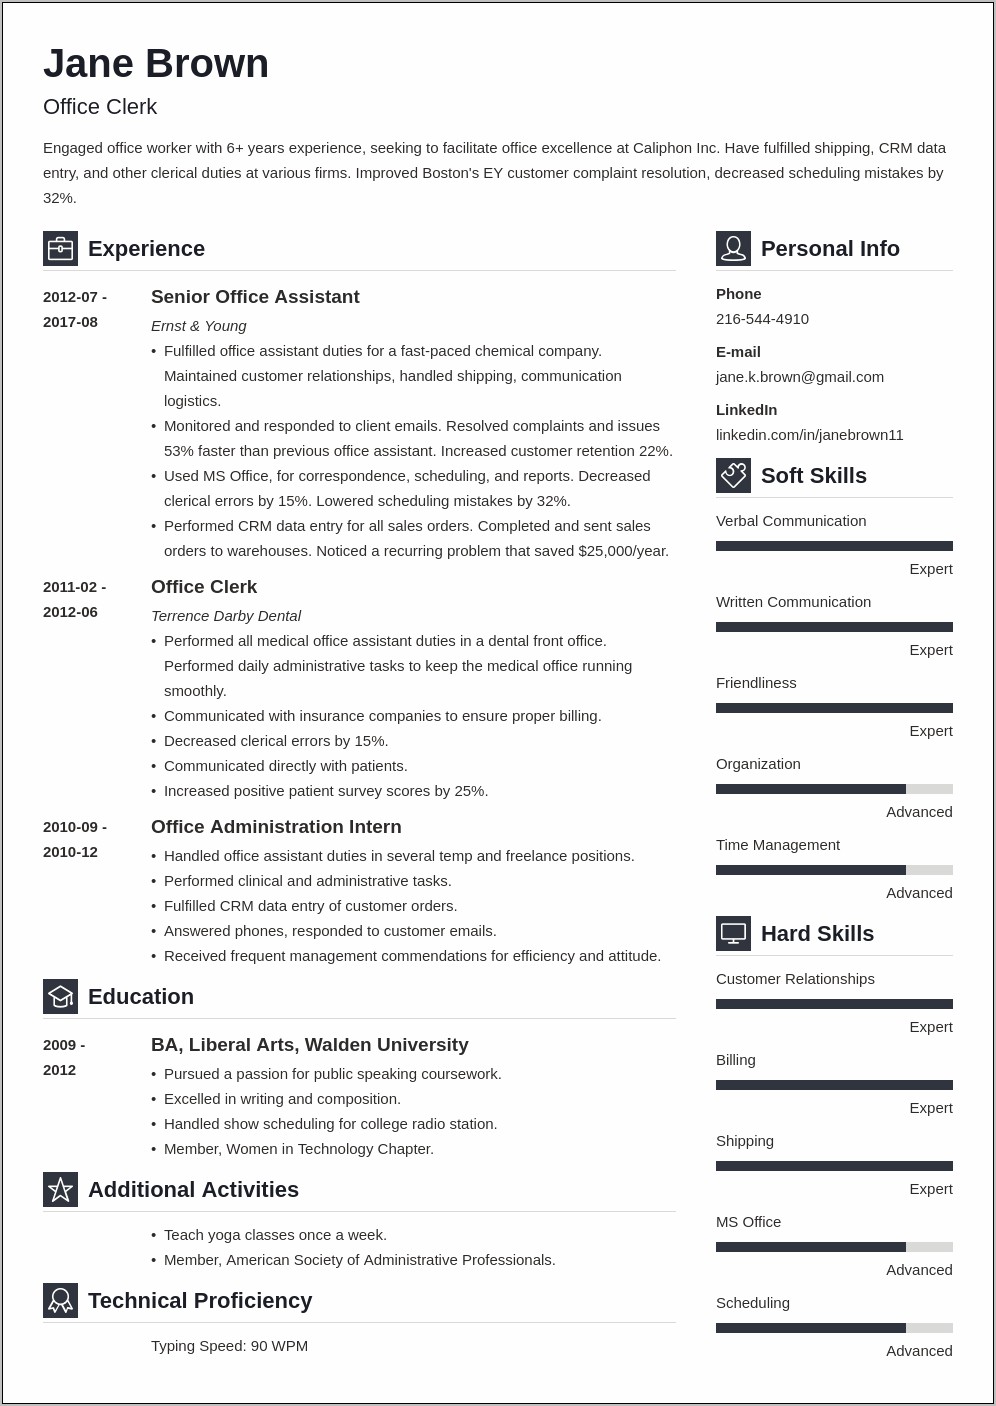 Resume Templates For Office Clerical Positions